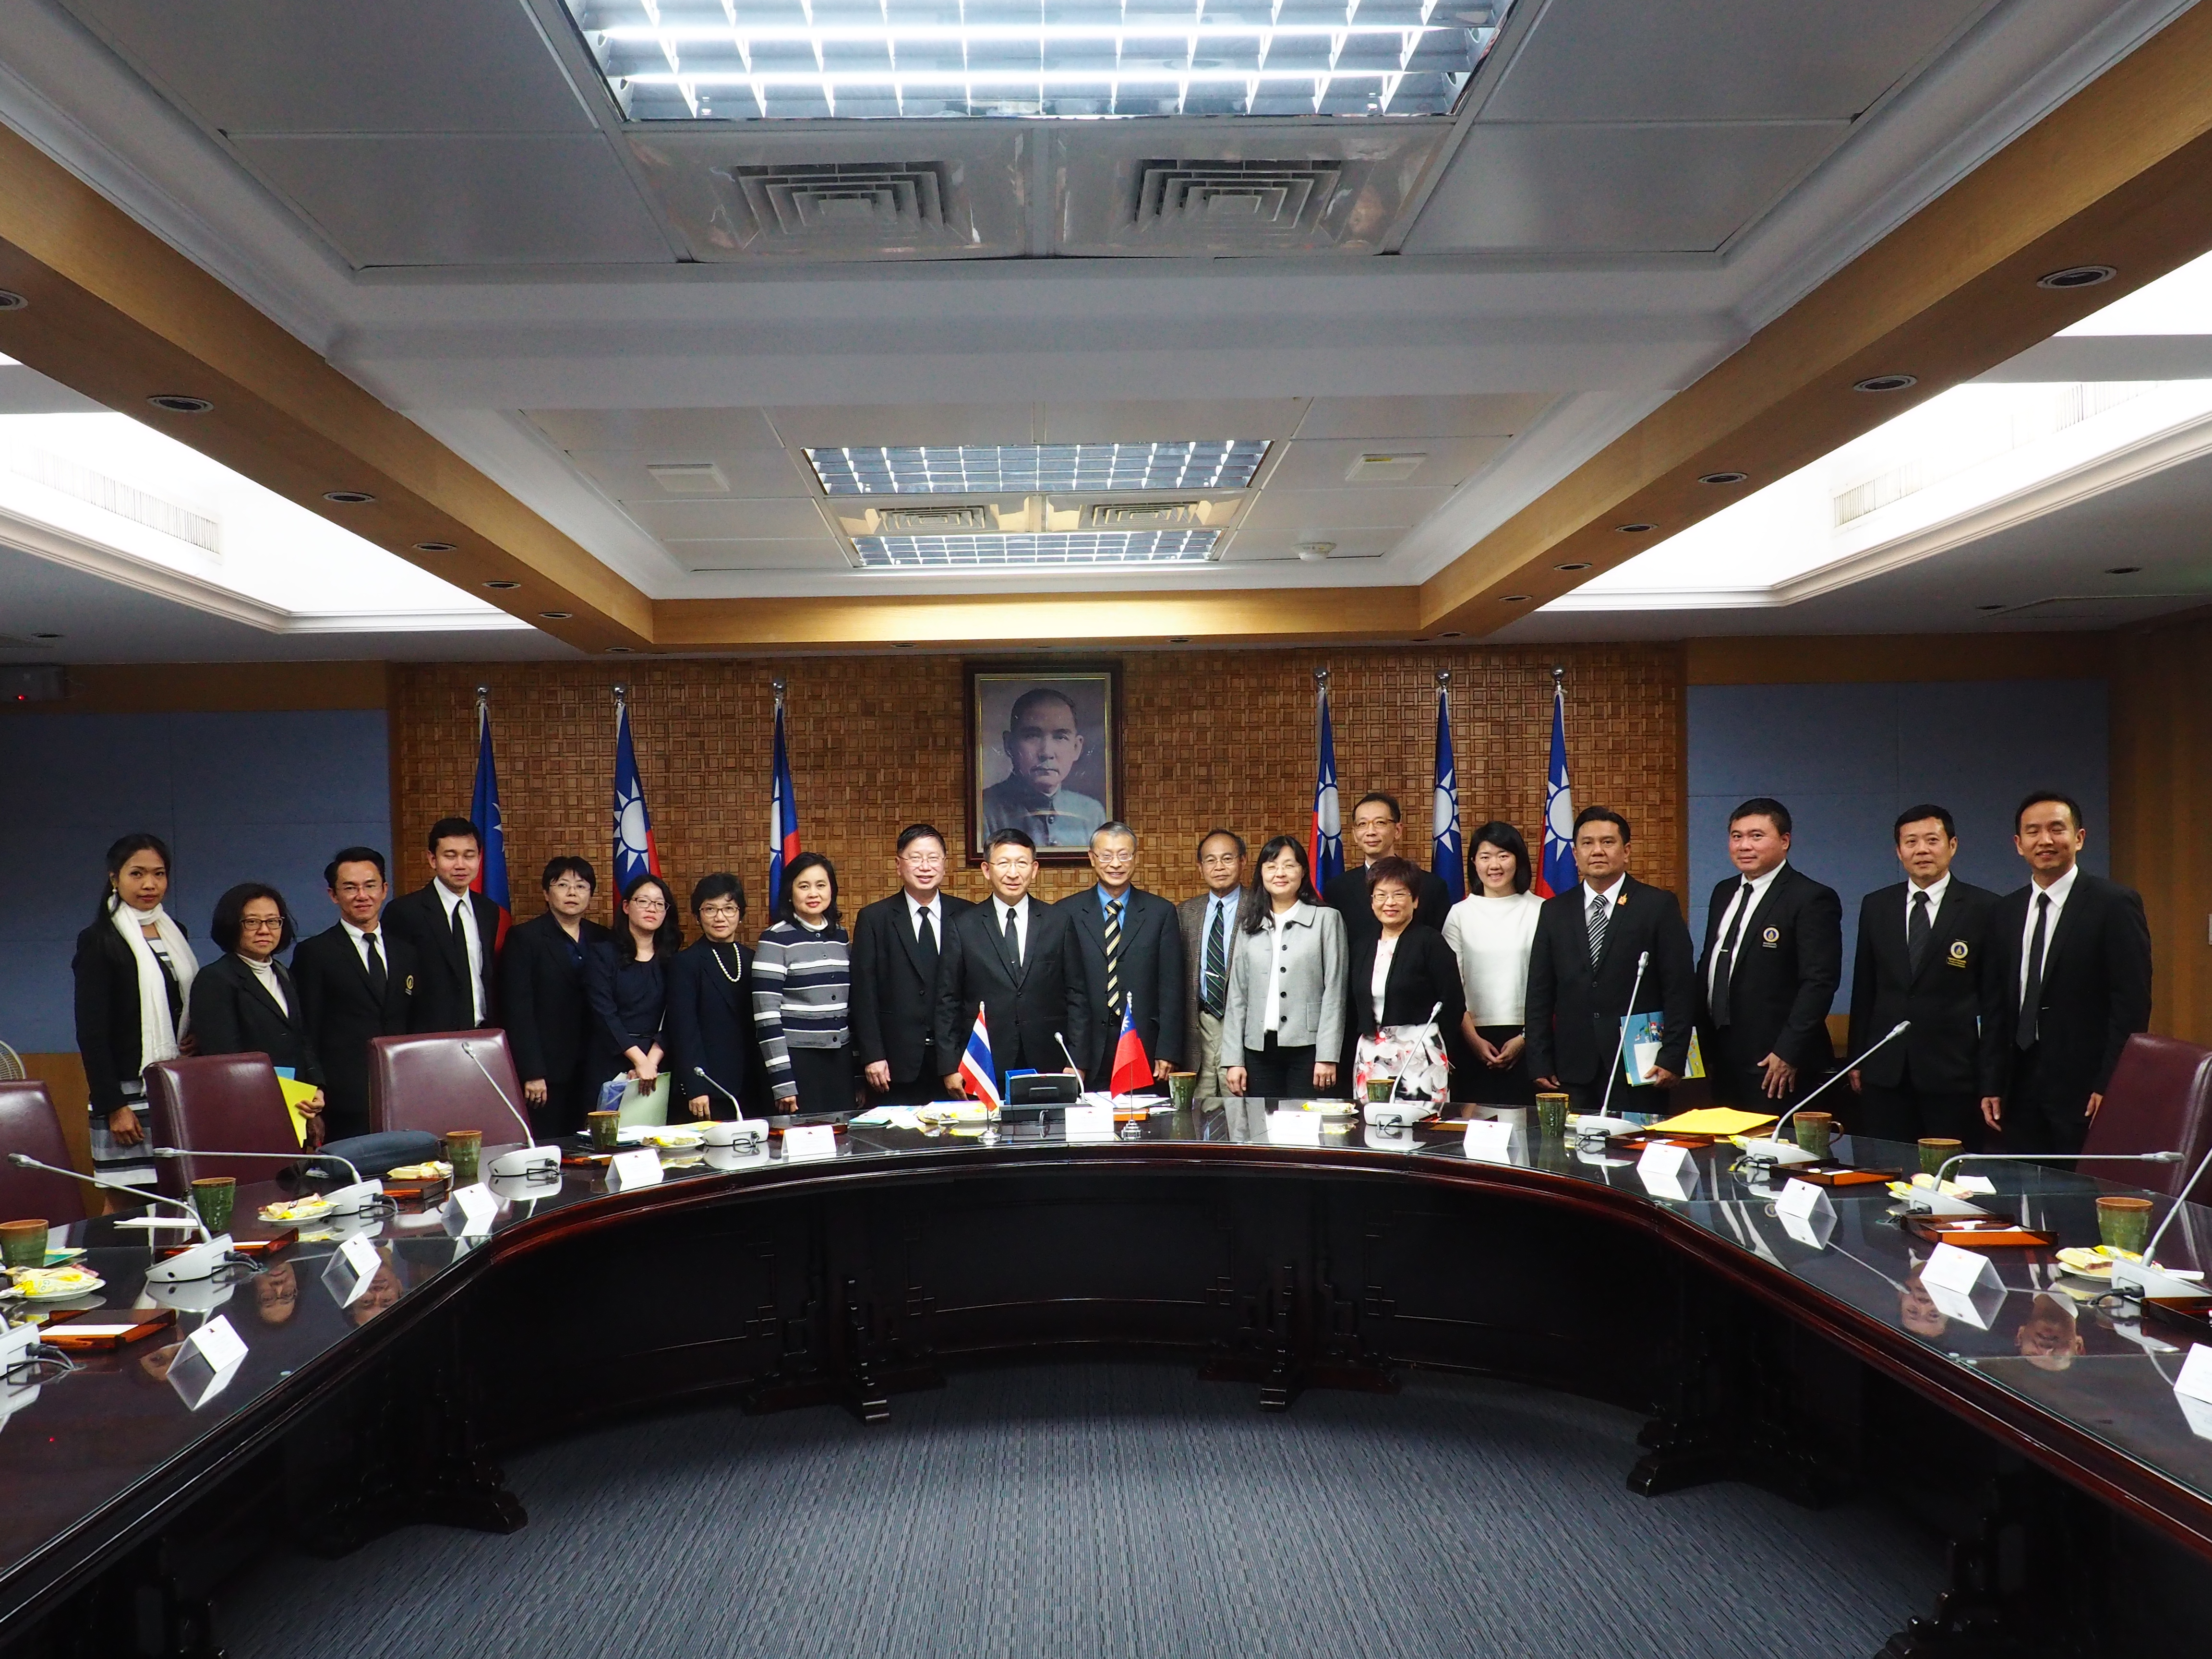 R.O.C. Ministry of Education and Mahidol University discuss Collaboration